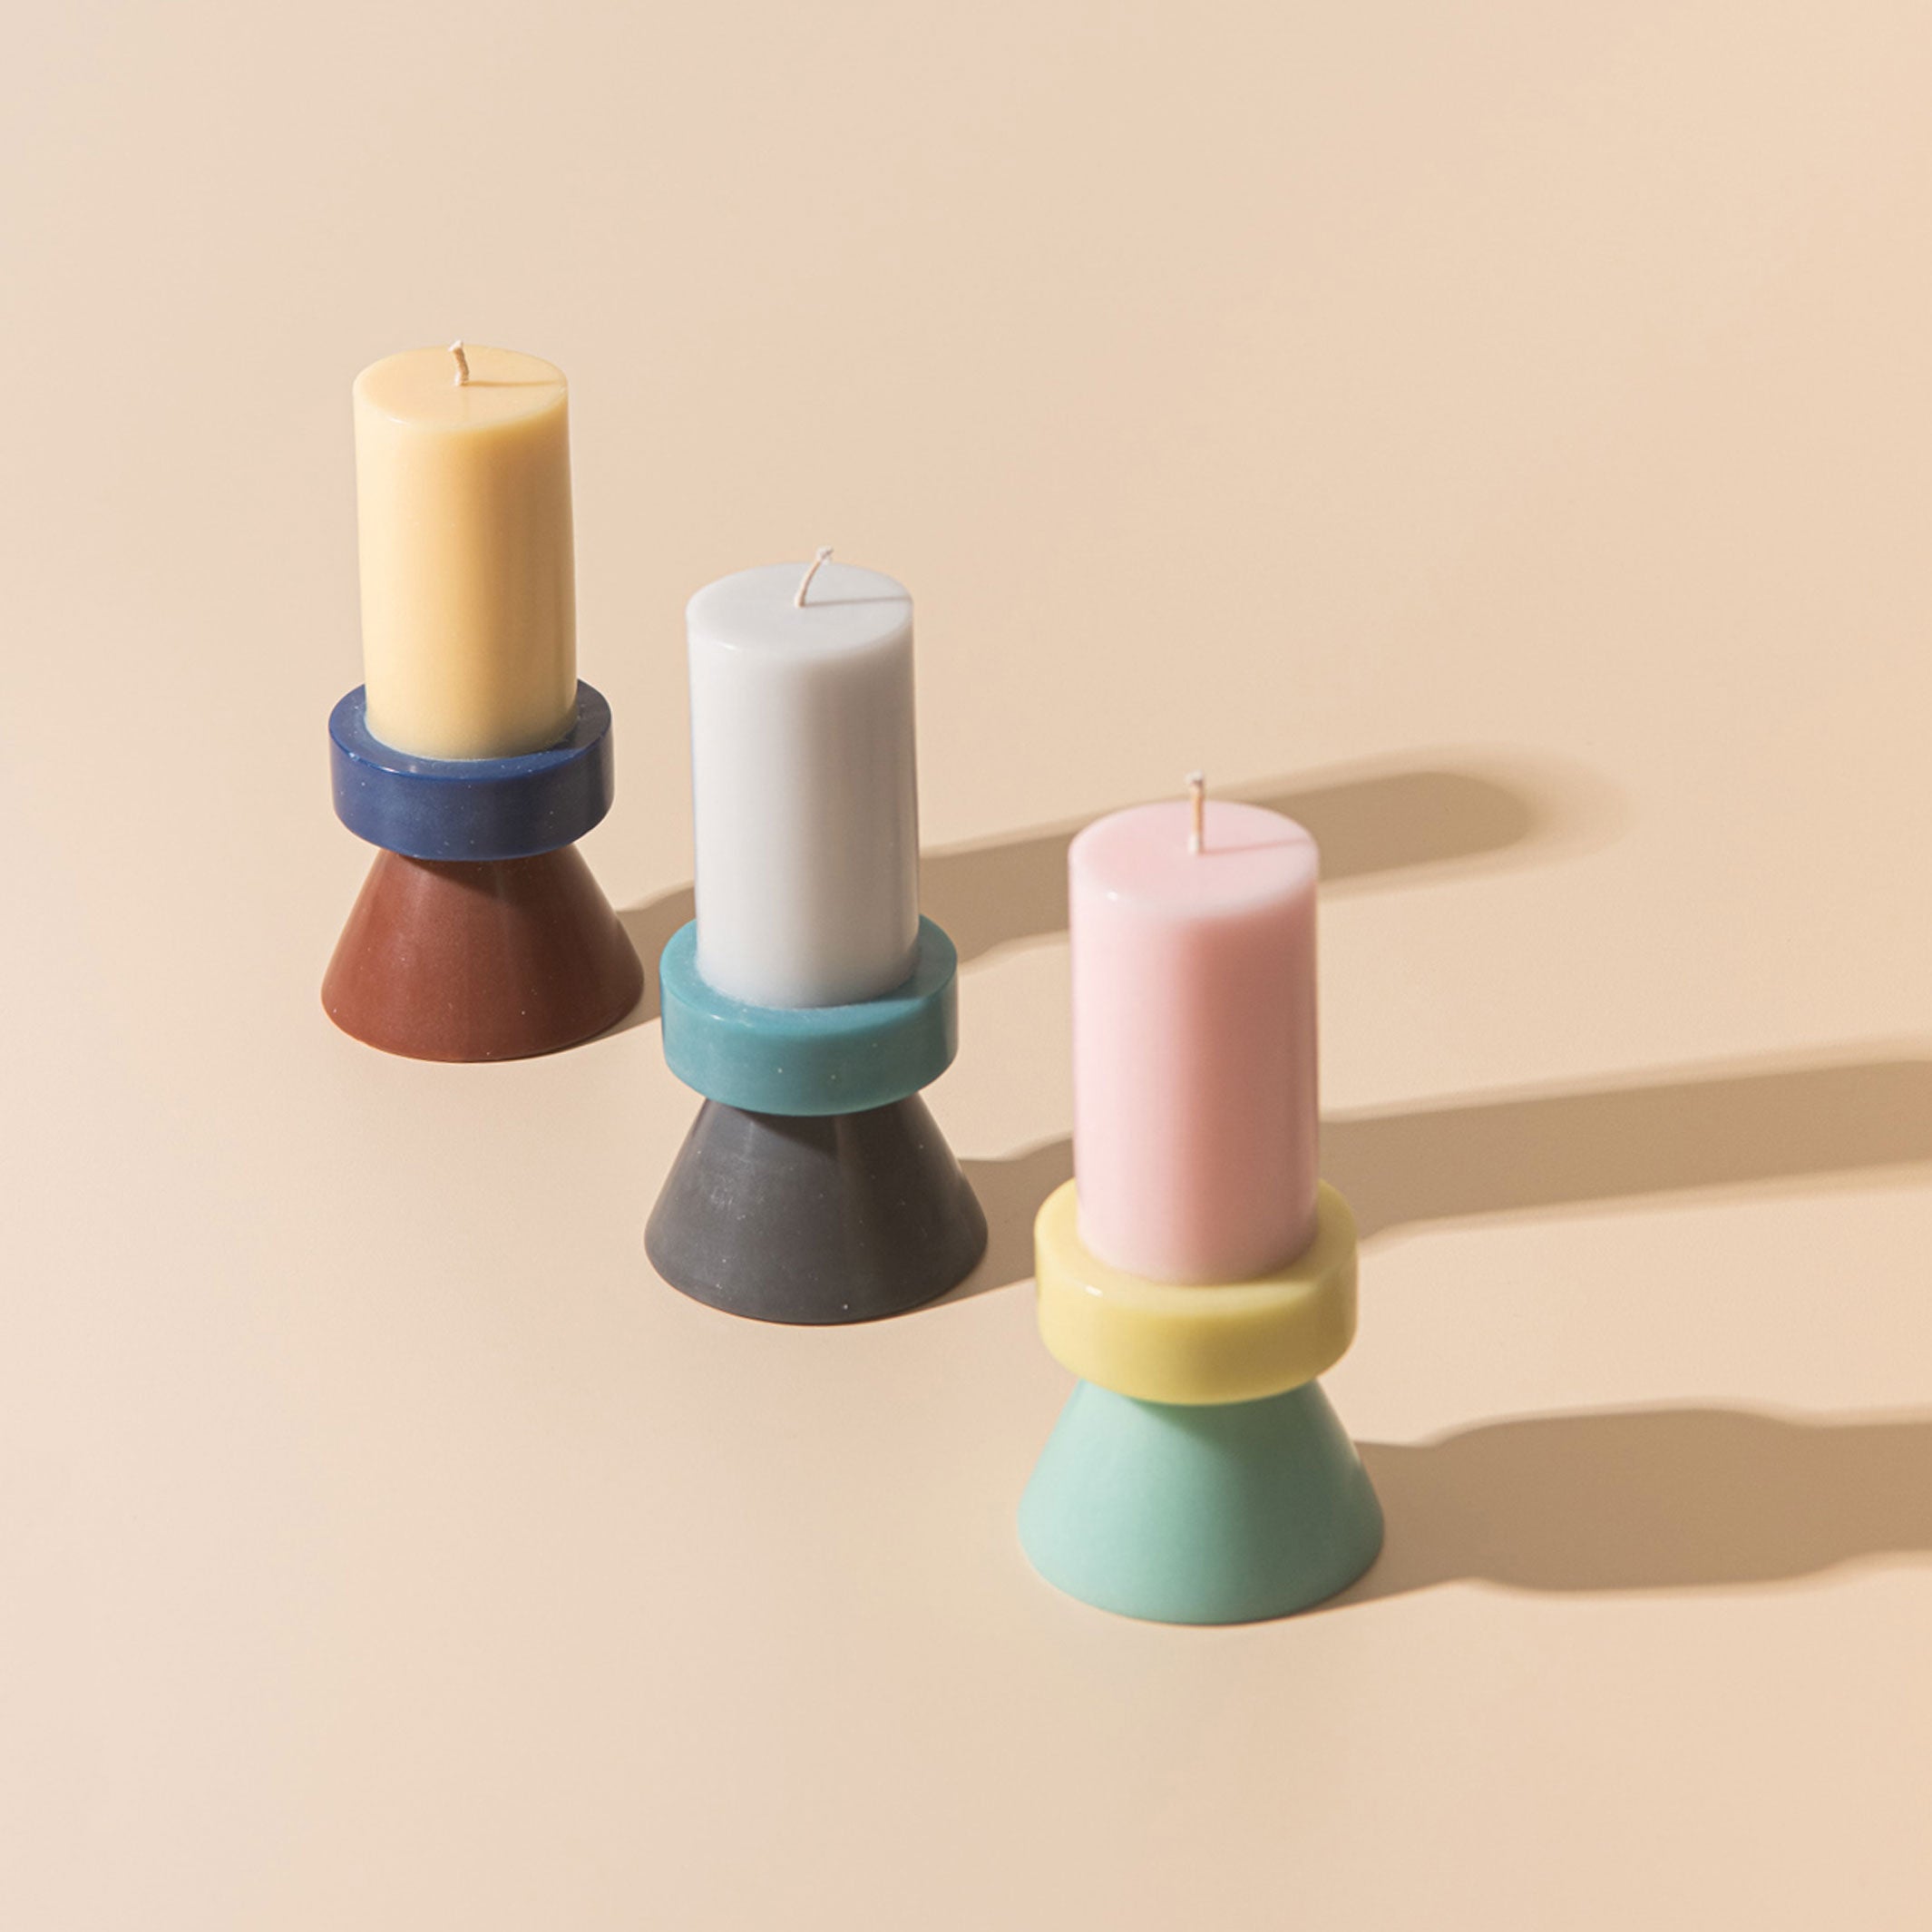 STACK CANDLE TALL | KERZE in Farben banana-navy-chocolate | 30 Std. Brenndauer | YOD AND CO